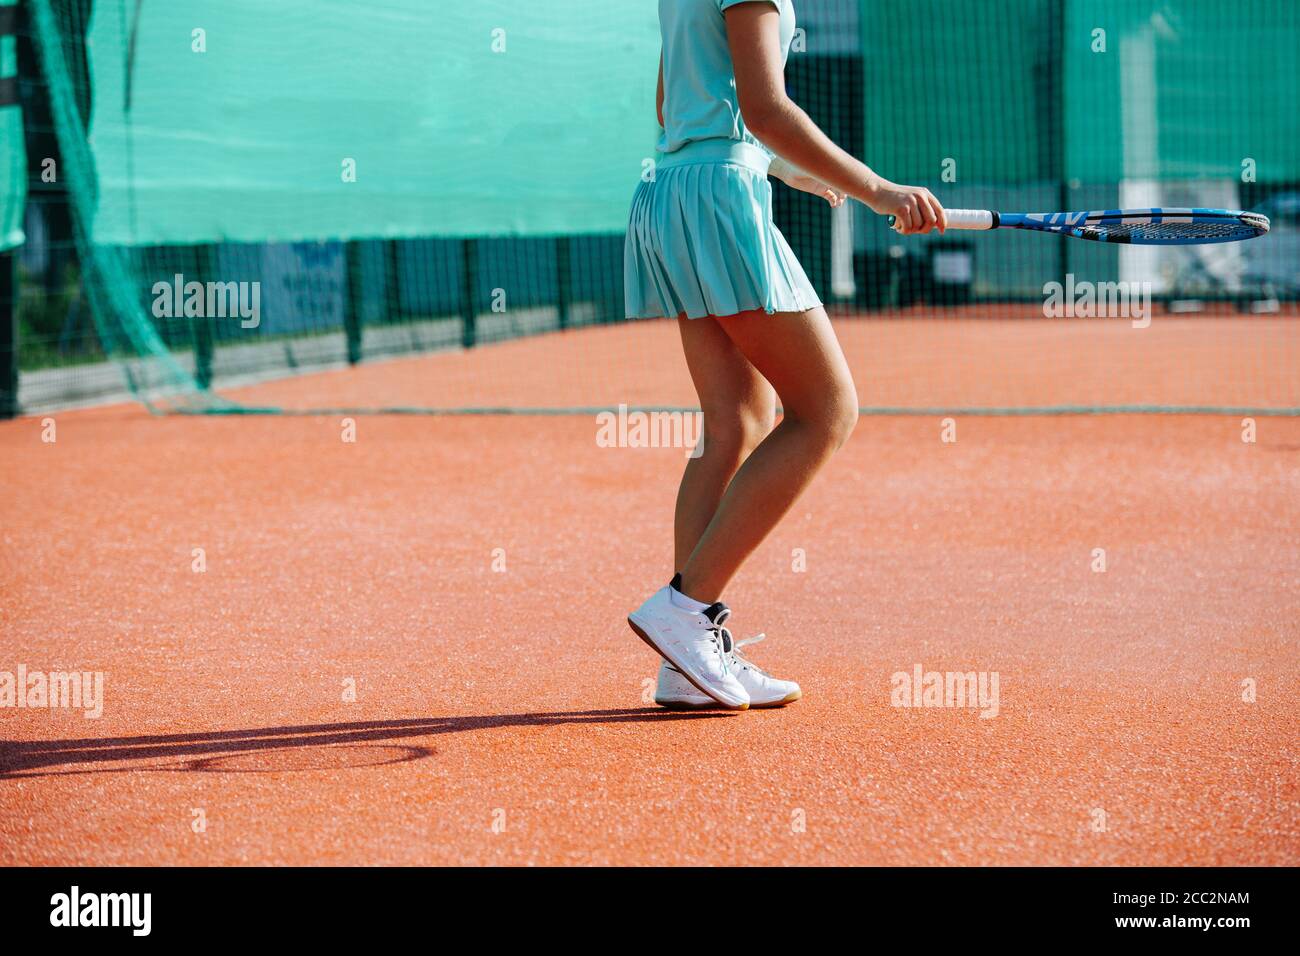 Legs of a girl training on a new tennis court, walking on a clearing zone Stock Photo